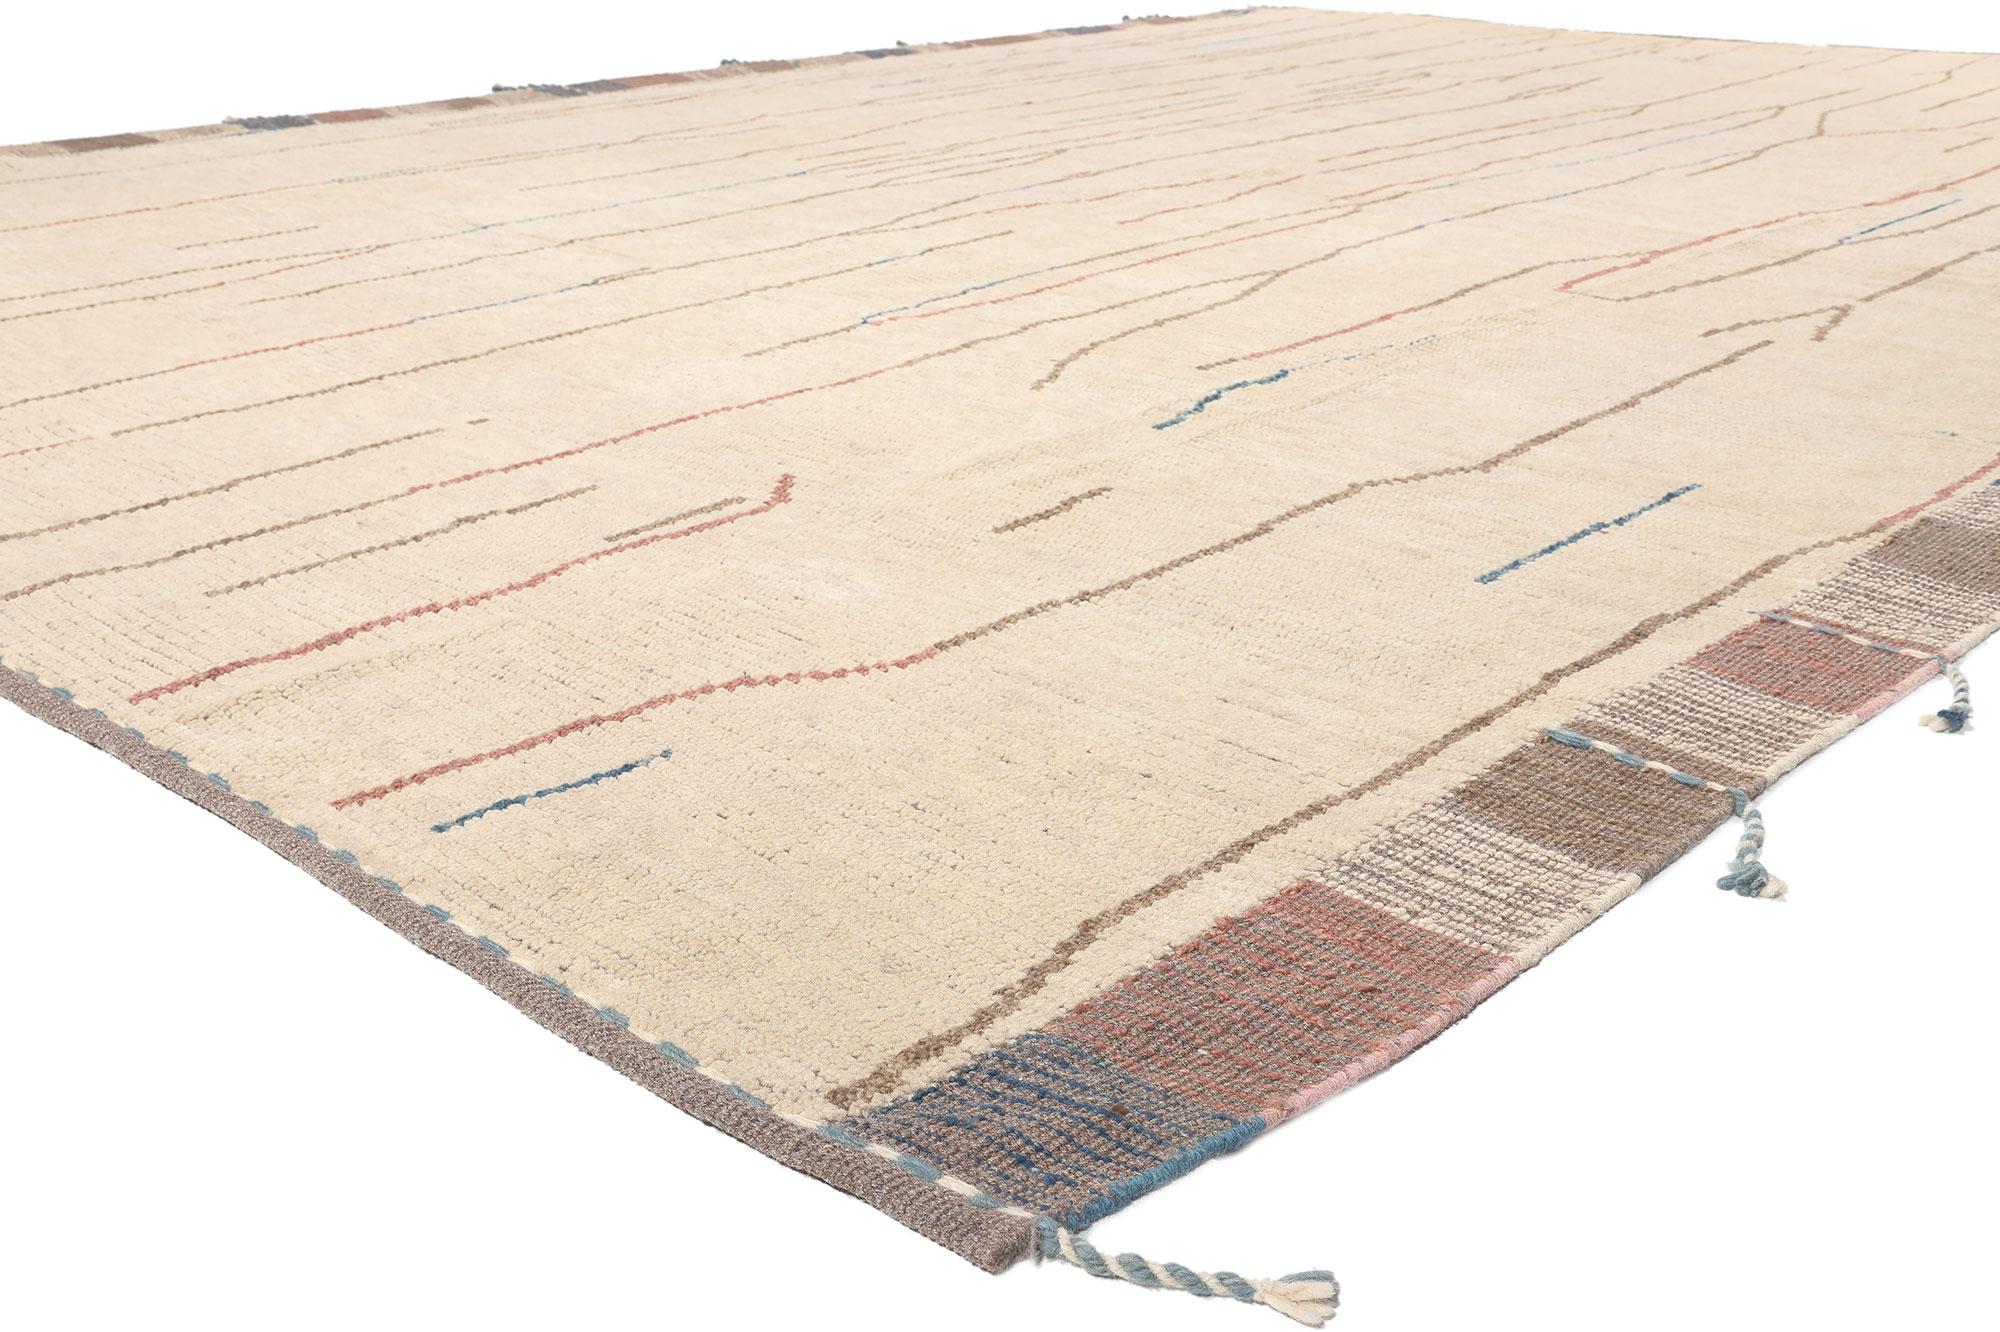 81019 Organic Modern Moroccan Rug, 11'02 x 15'10.
Wabi-Sabi meets sustainable elegance in this hand knotted wool organic modern Moroccan area rug. The intrinsic linear tribal design and neutral earthy hues woven into this piece lends a laid-back,